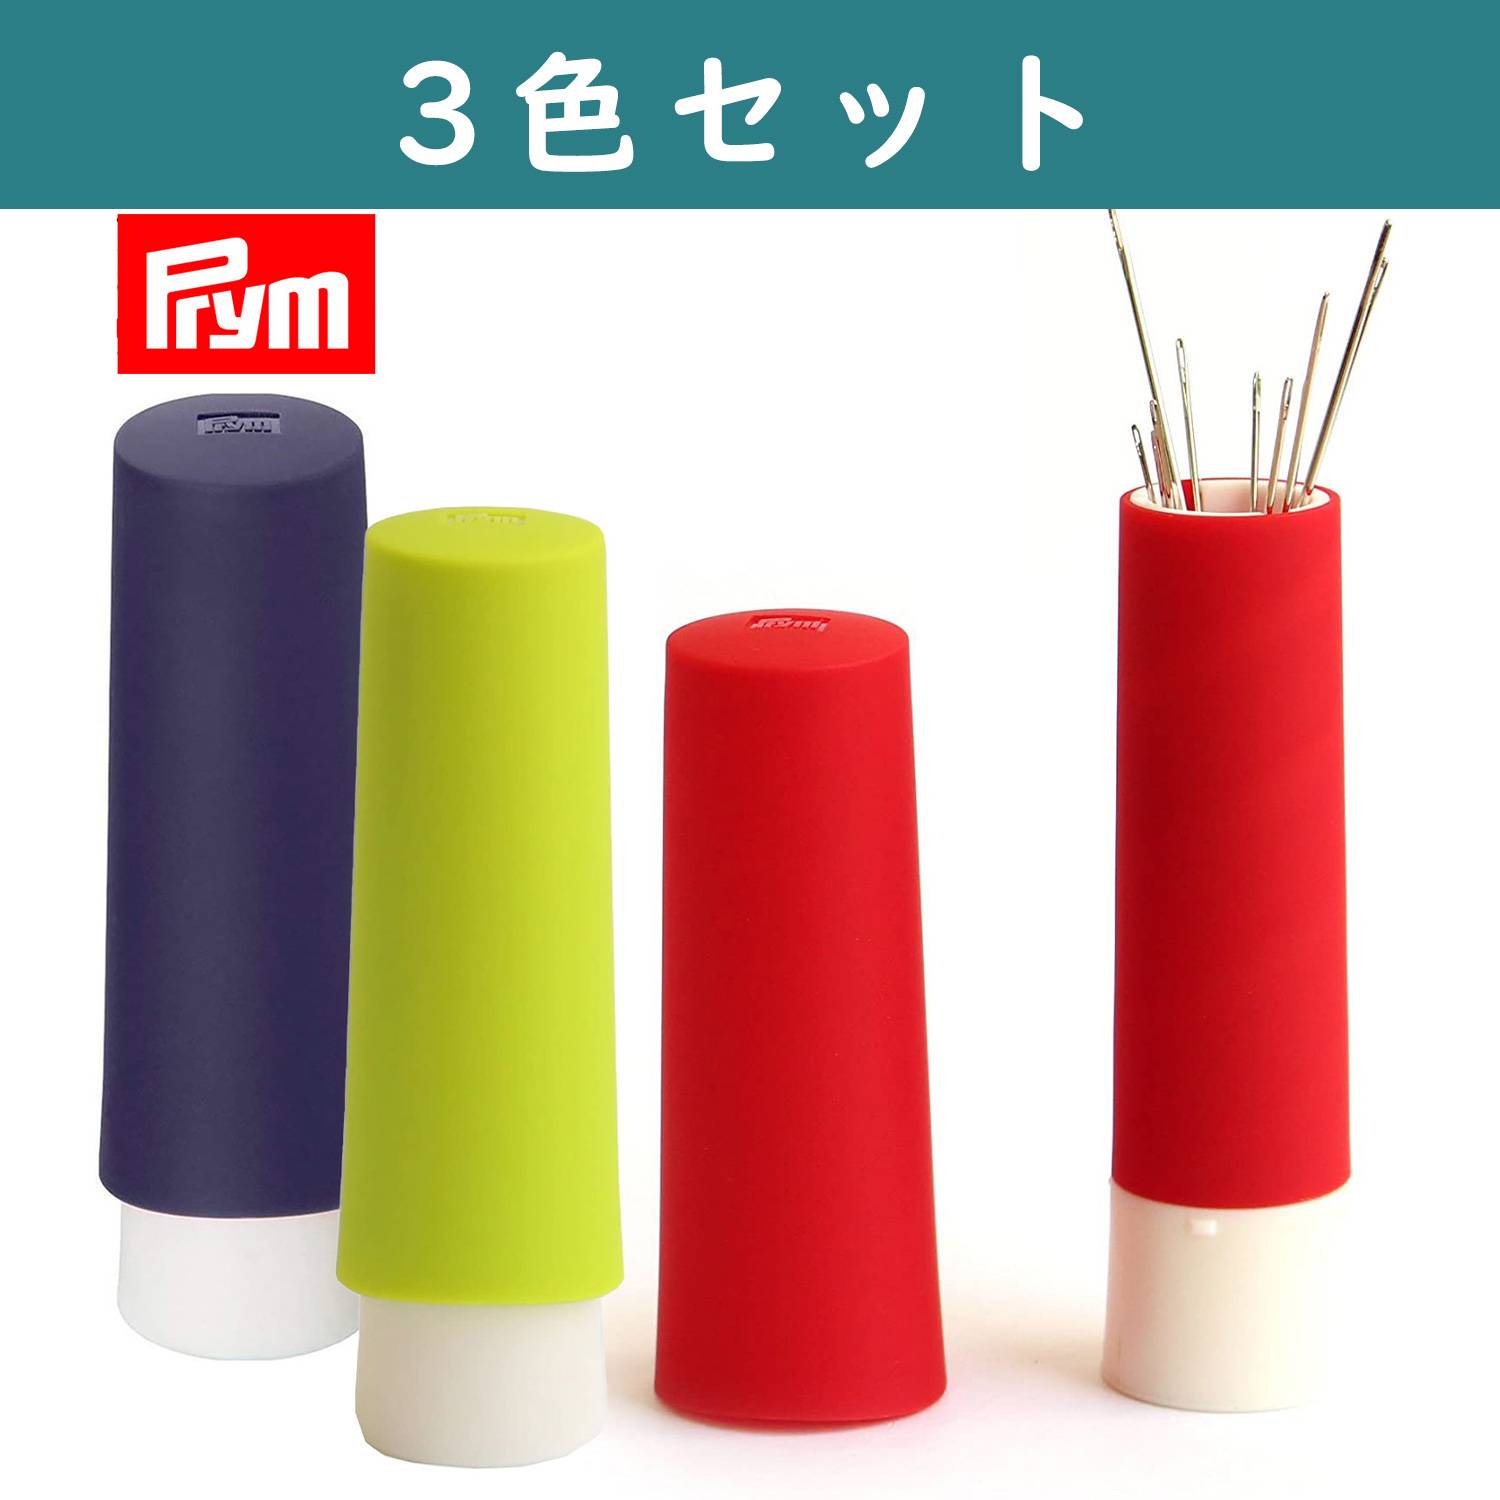 PRM563-3SET Prym Needle twister for storing sewing and darning needles 3colors set (set)